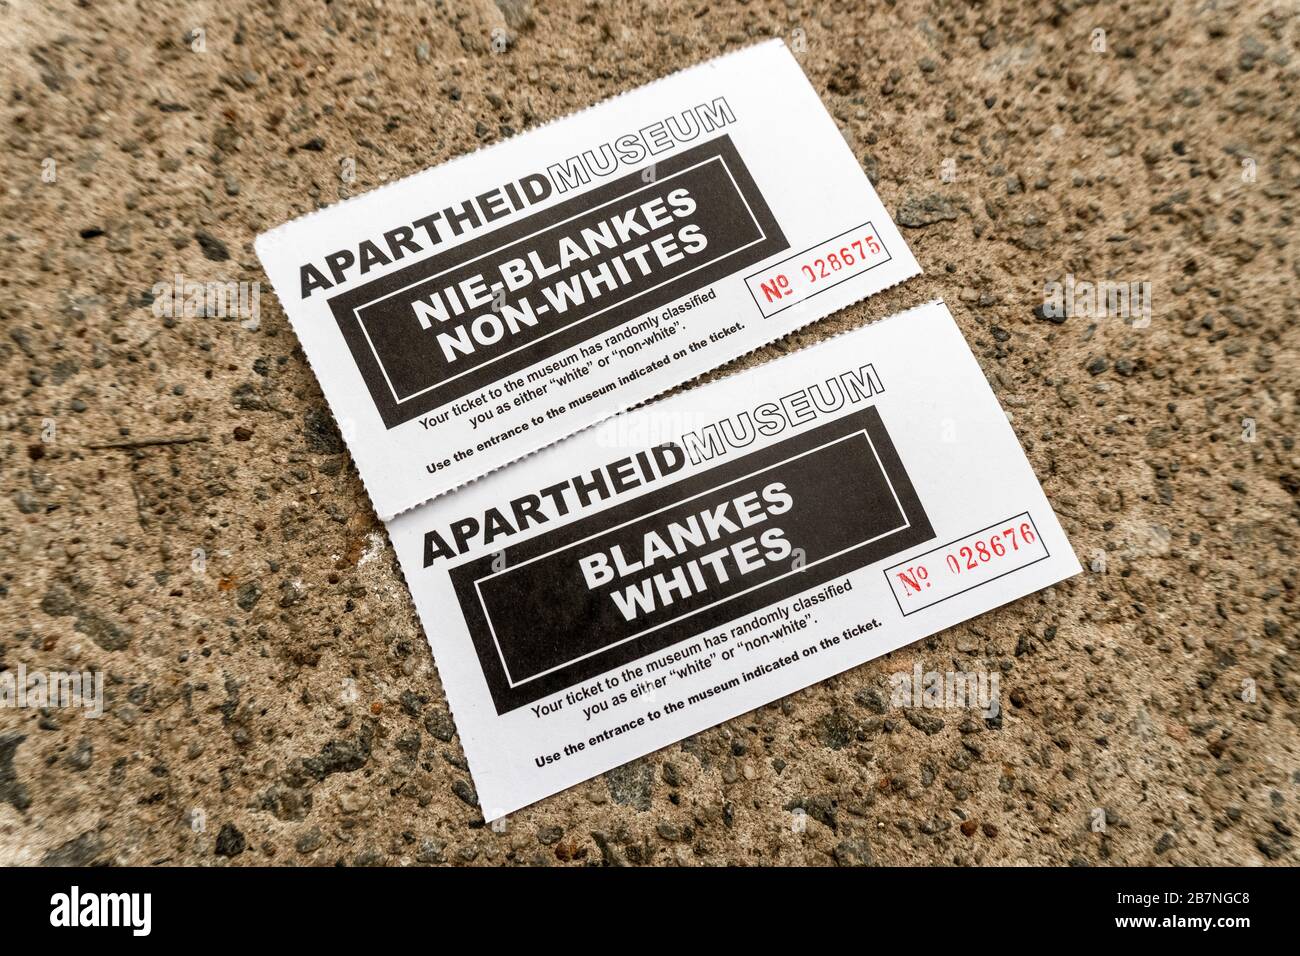 Johannesburg, South Africa - May 25, 2019: Two different tickets to Apartheid Museum, one for Whites and second for Non-Whites Stock Photo